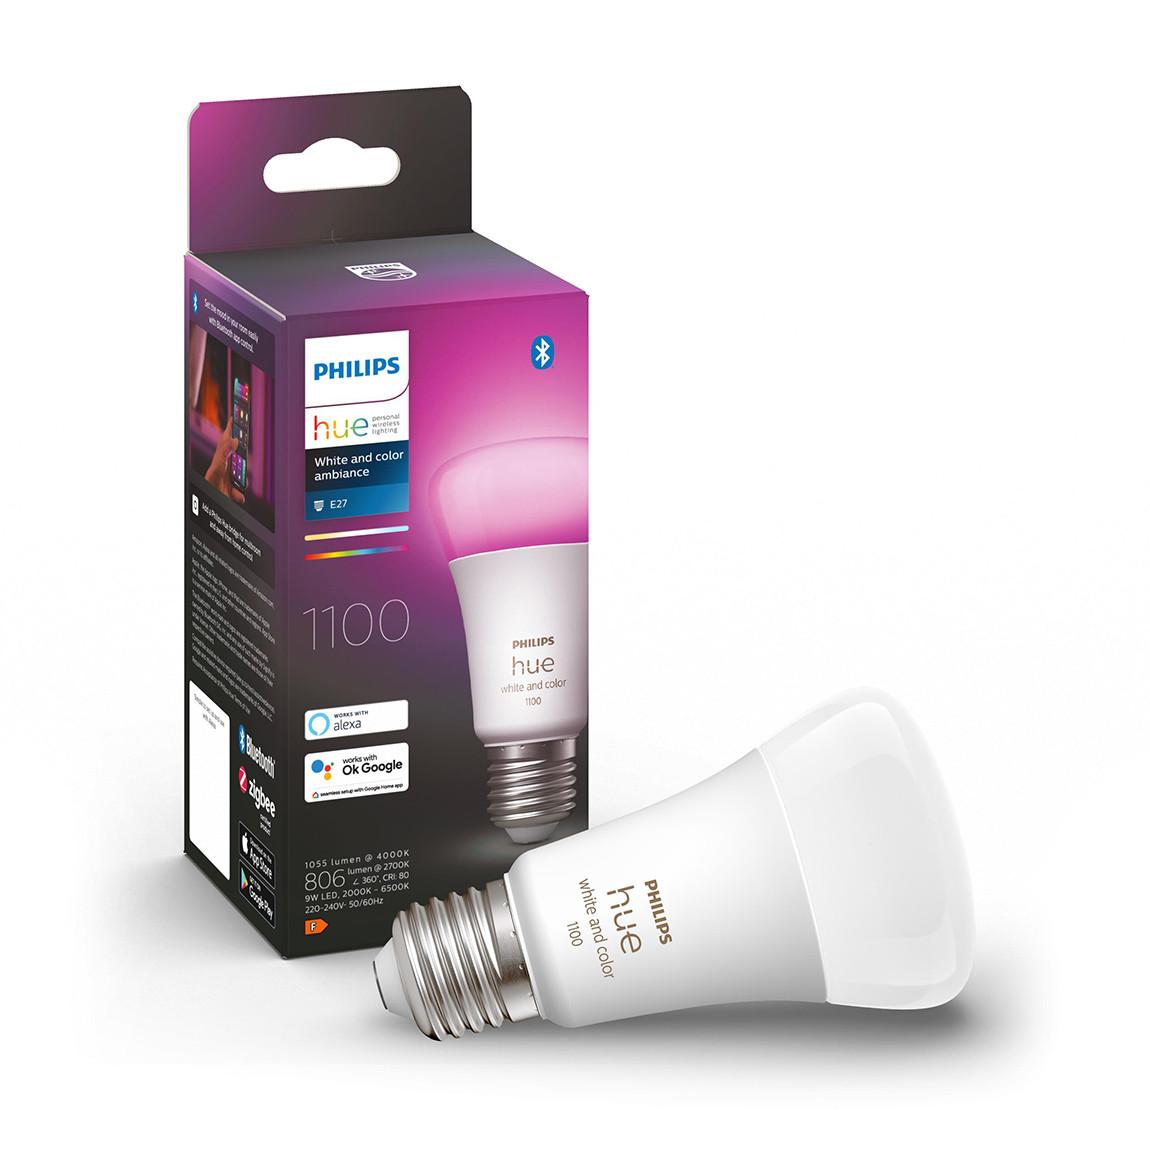 Philips Hue White & Color Ambiance E27 Doppelpack 1100 mit Verpackung